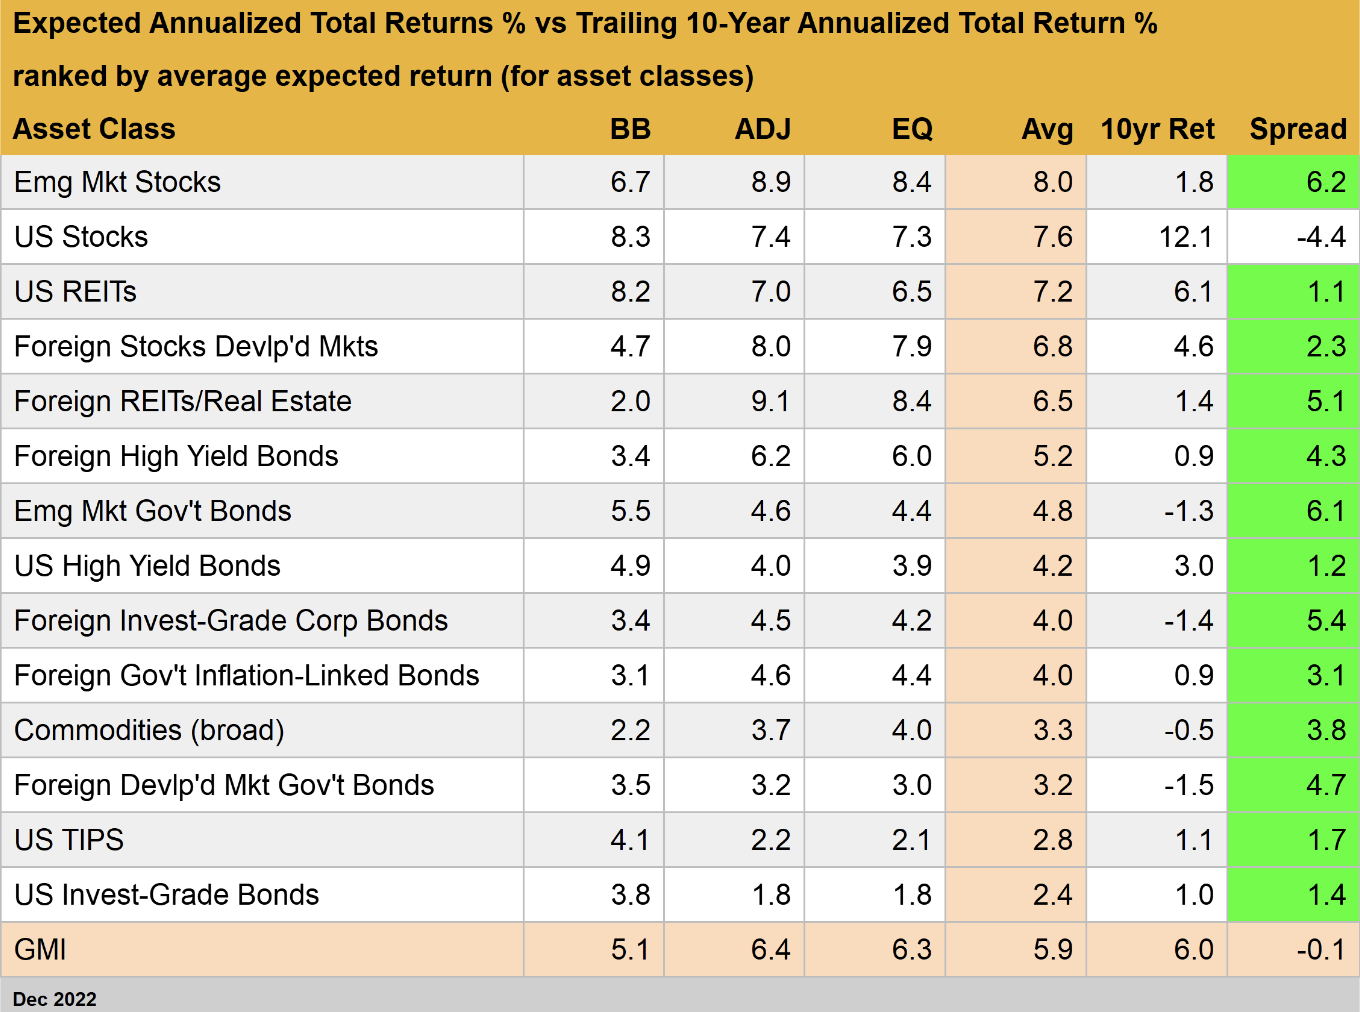 Expected Annualized Total Returns Vs. Trailing Annualized Returns